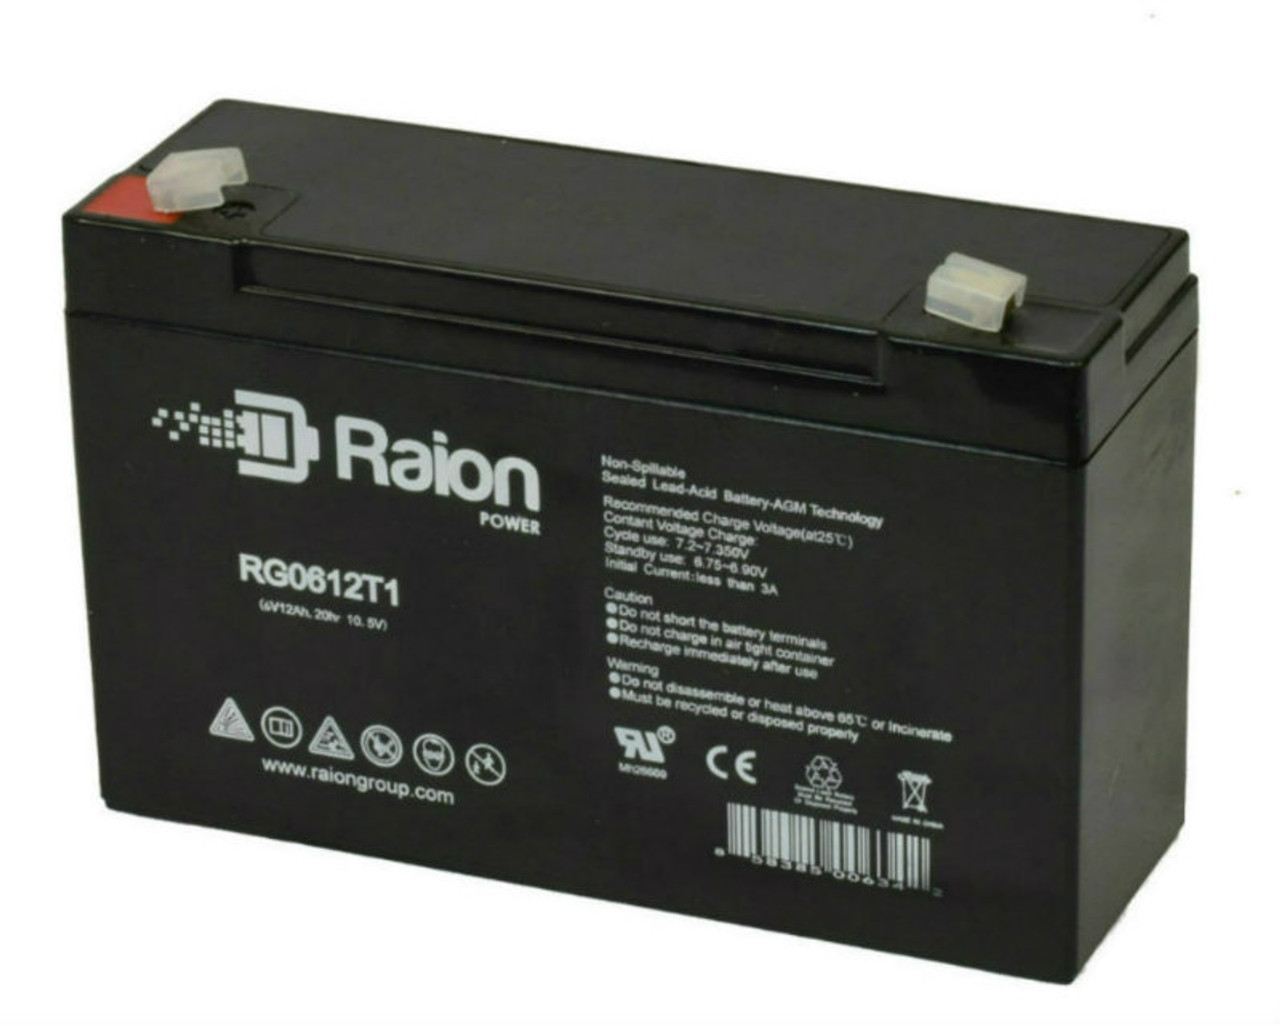 Raion Power RG06120T1 Replacement 6V 12Ah Emergency Light Battery for ELS 2SQF